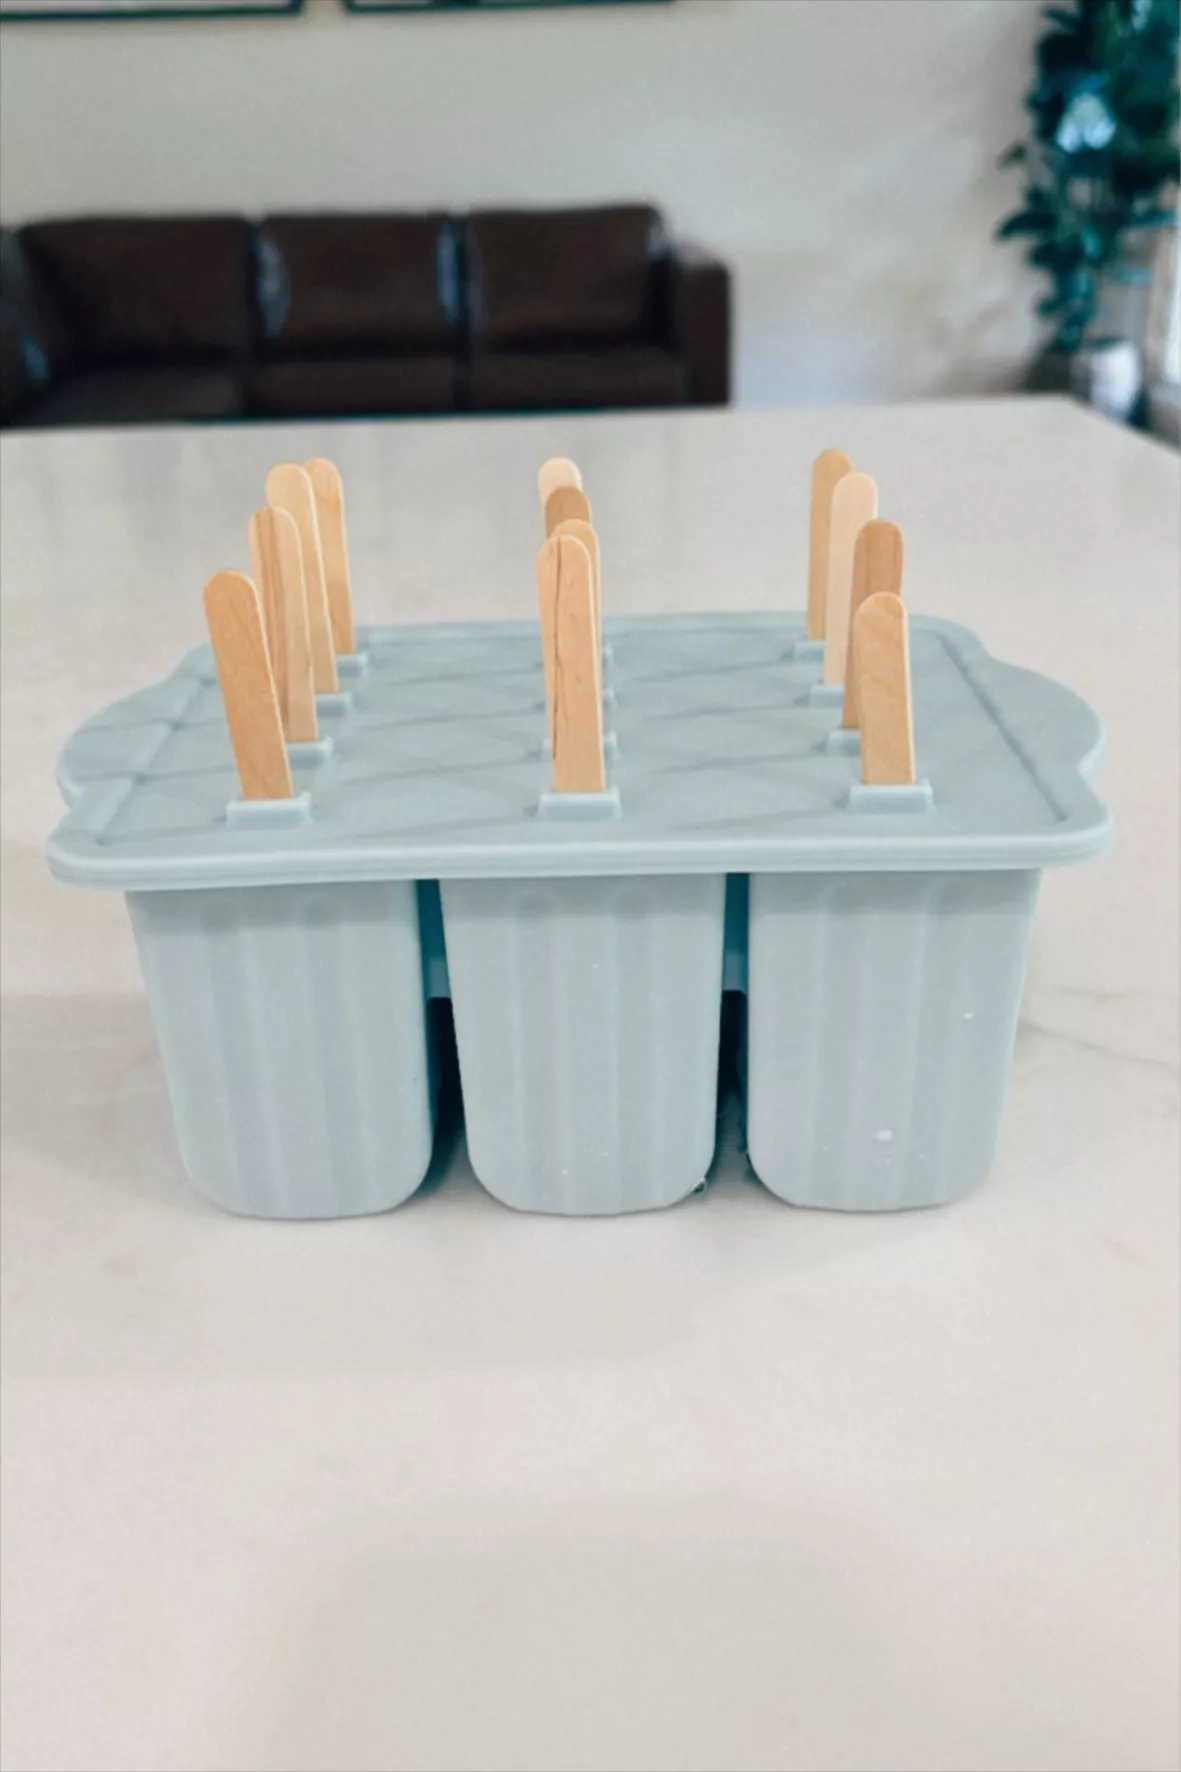 Popsicles Molds, MEETRUE 12 Pieces Silicone Popsicle Molds Easy-Releas